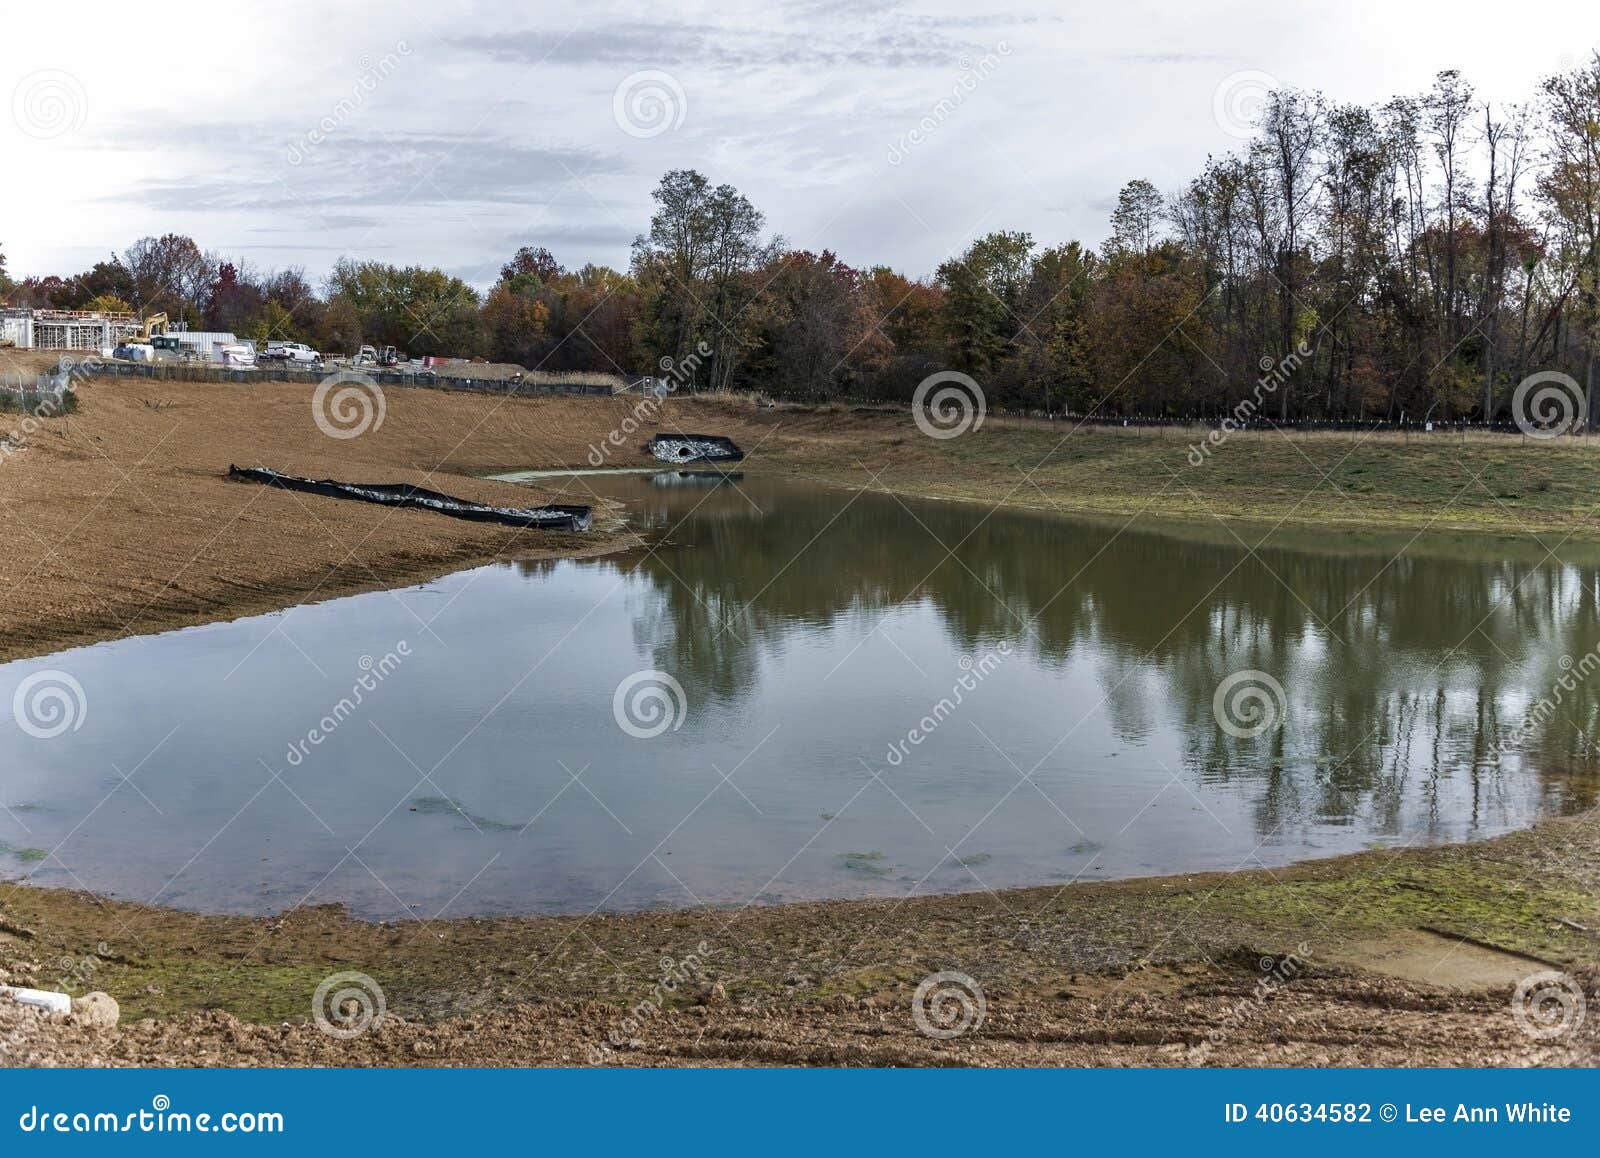 storm water drainage pond on construction site